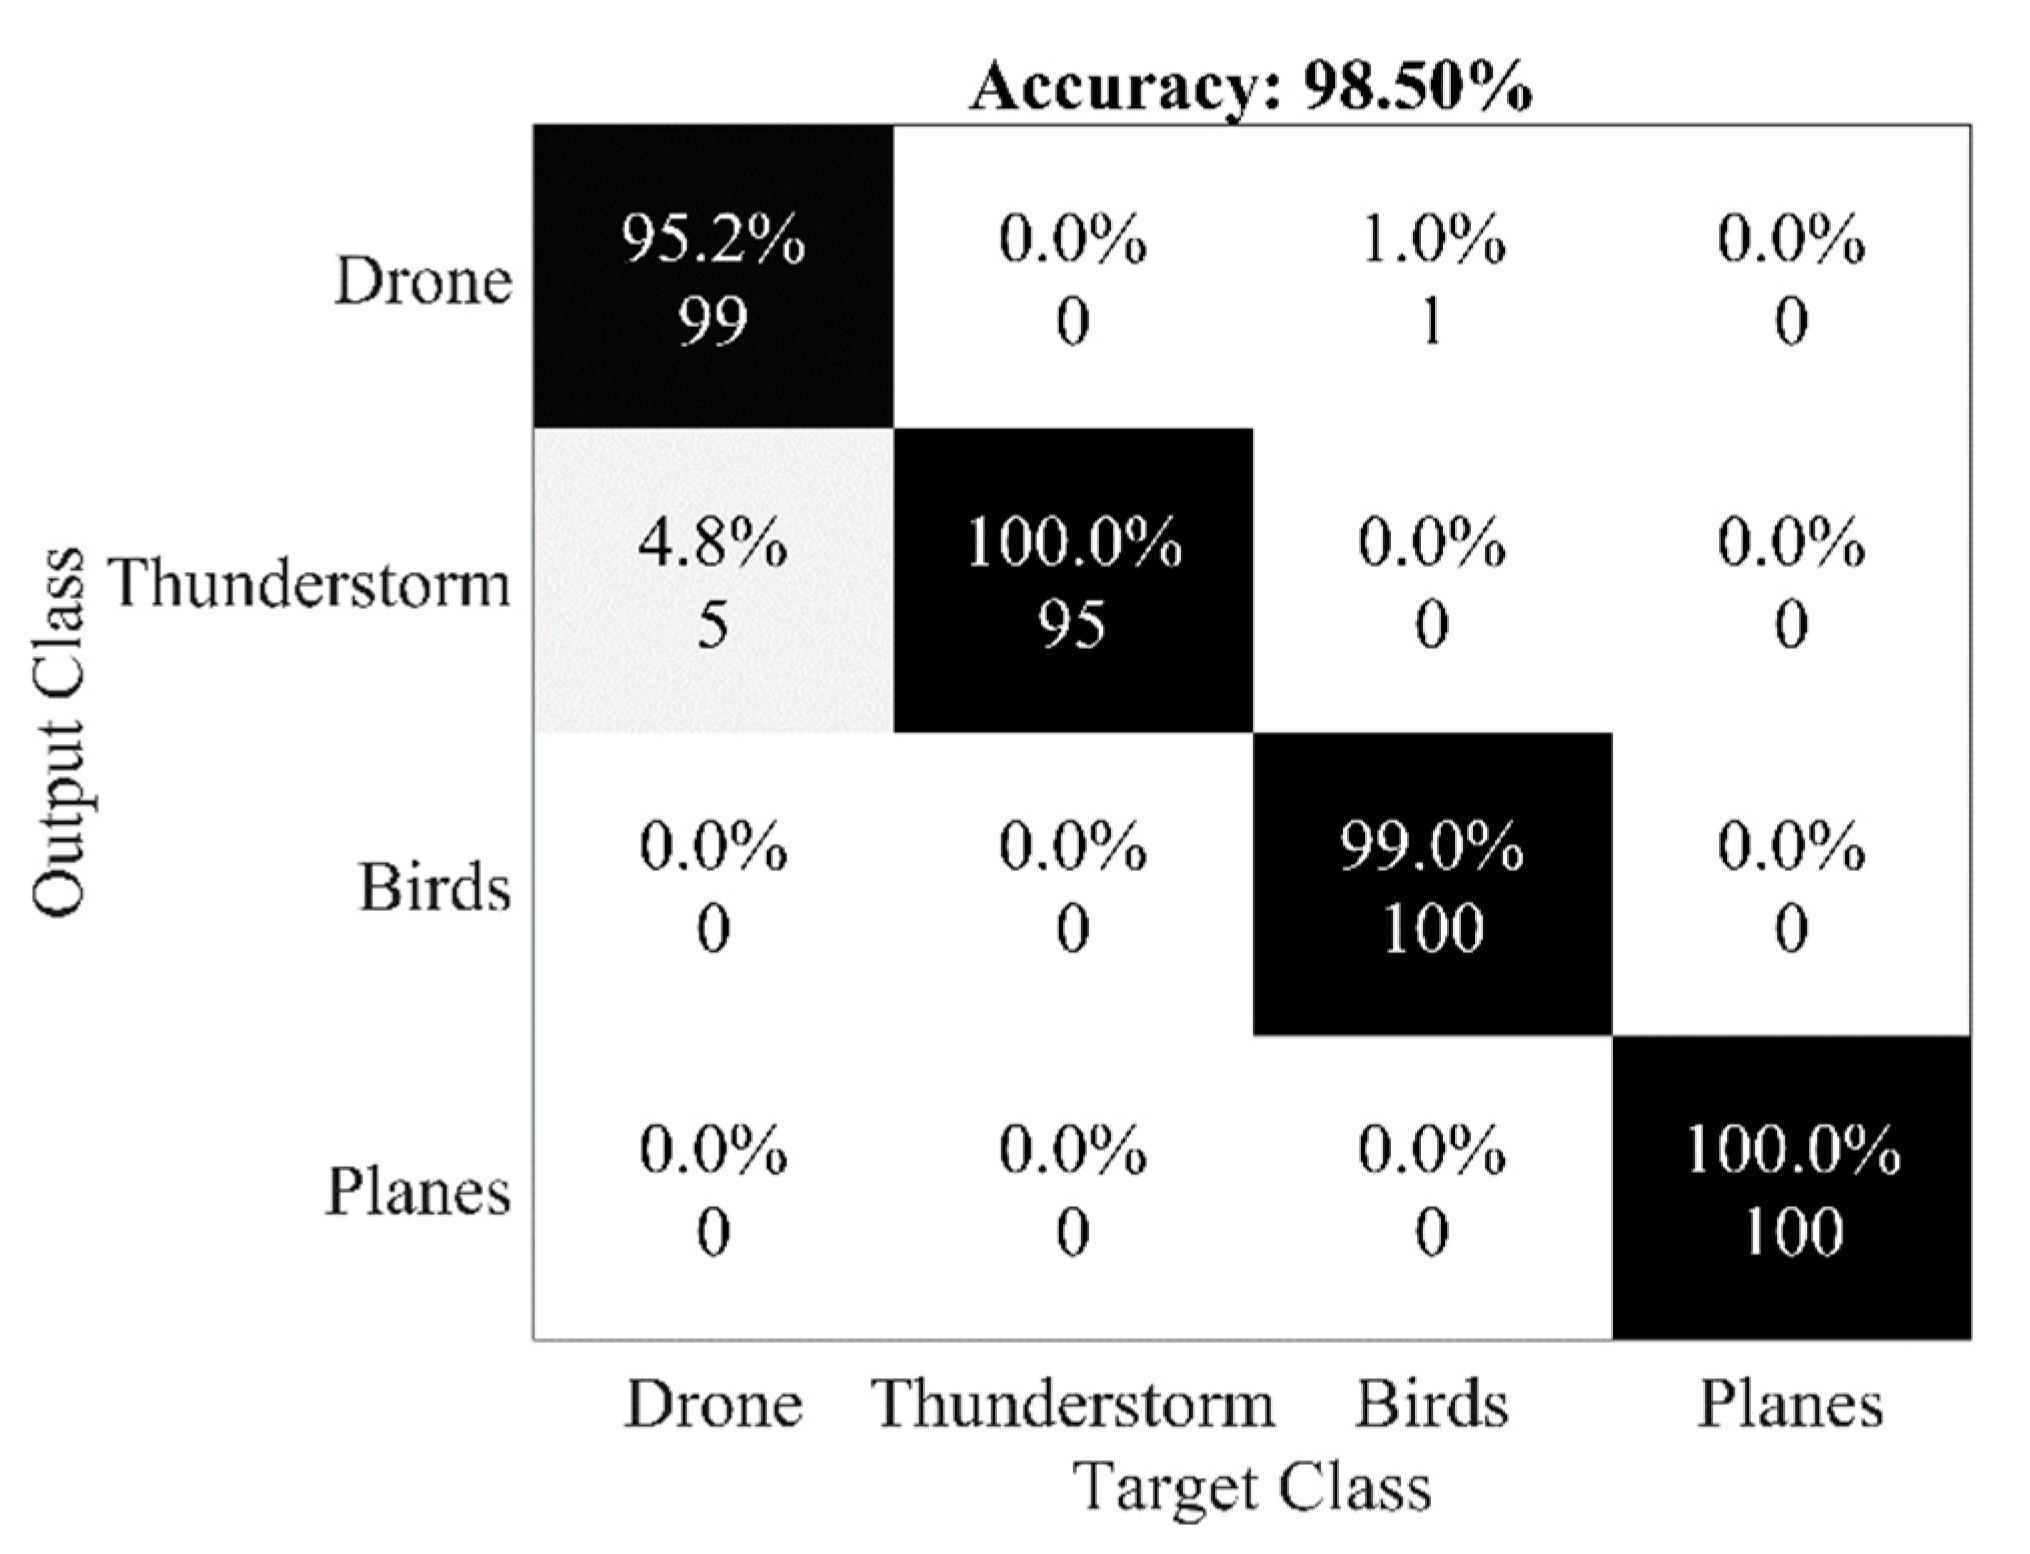 Sensors Free Full Text Malicious Uav Detection Using Integrated Audio And Visual Features For Public Safety Applications Html